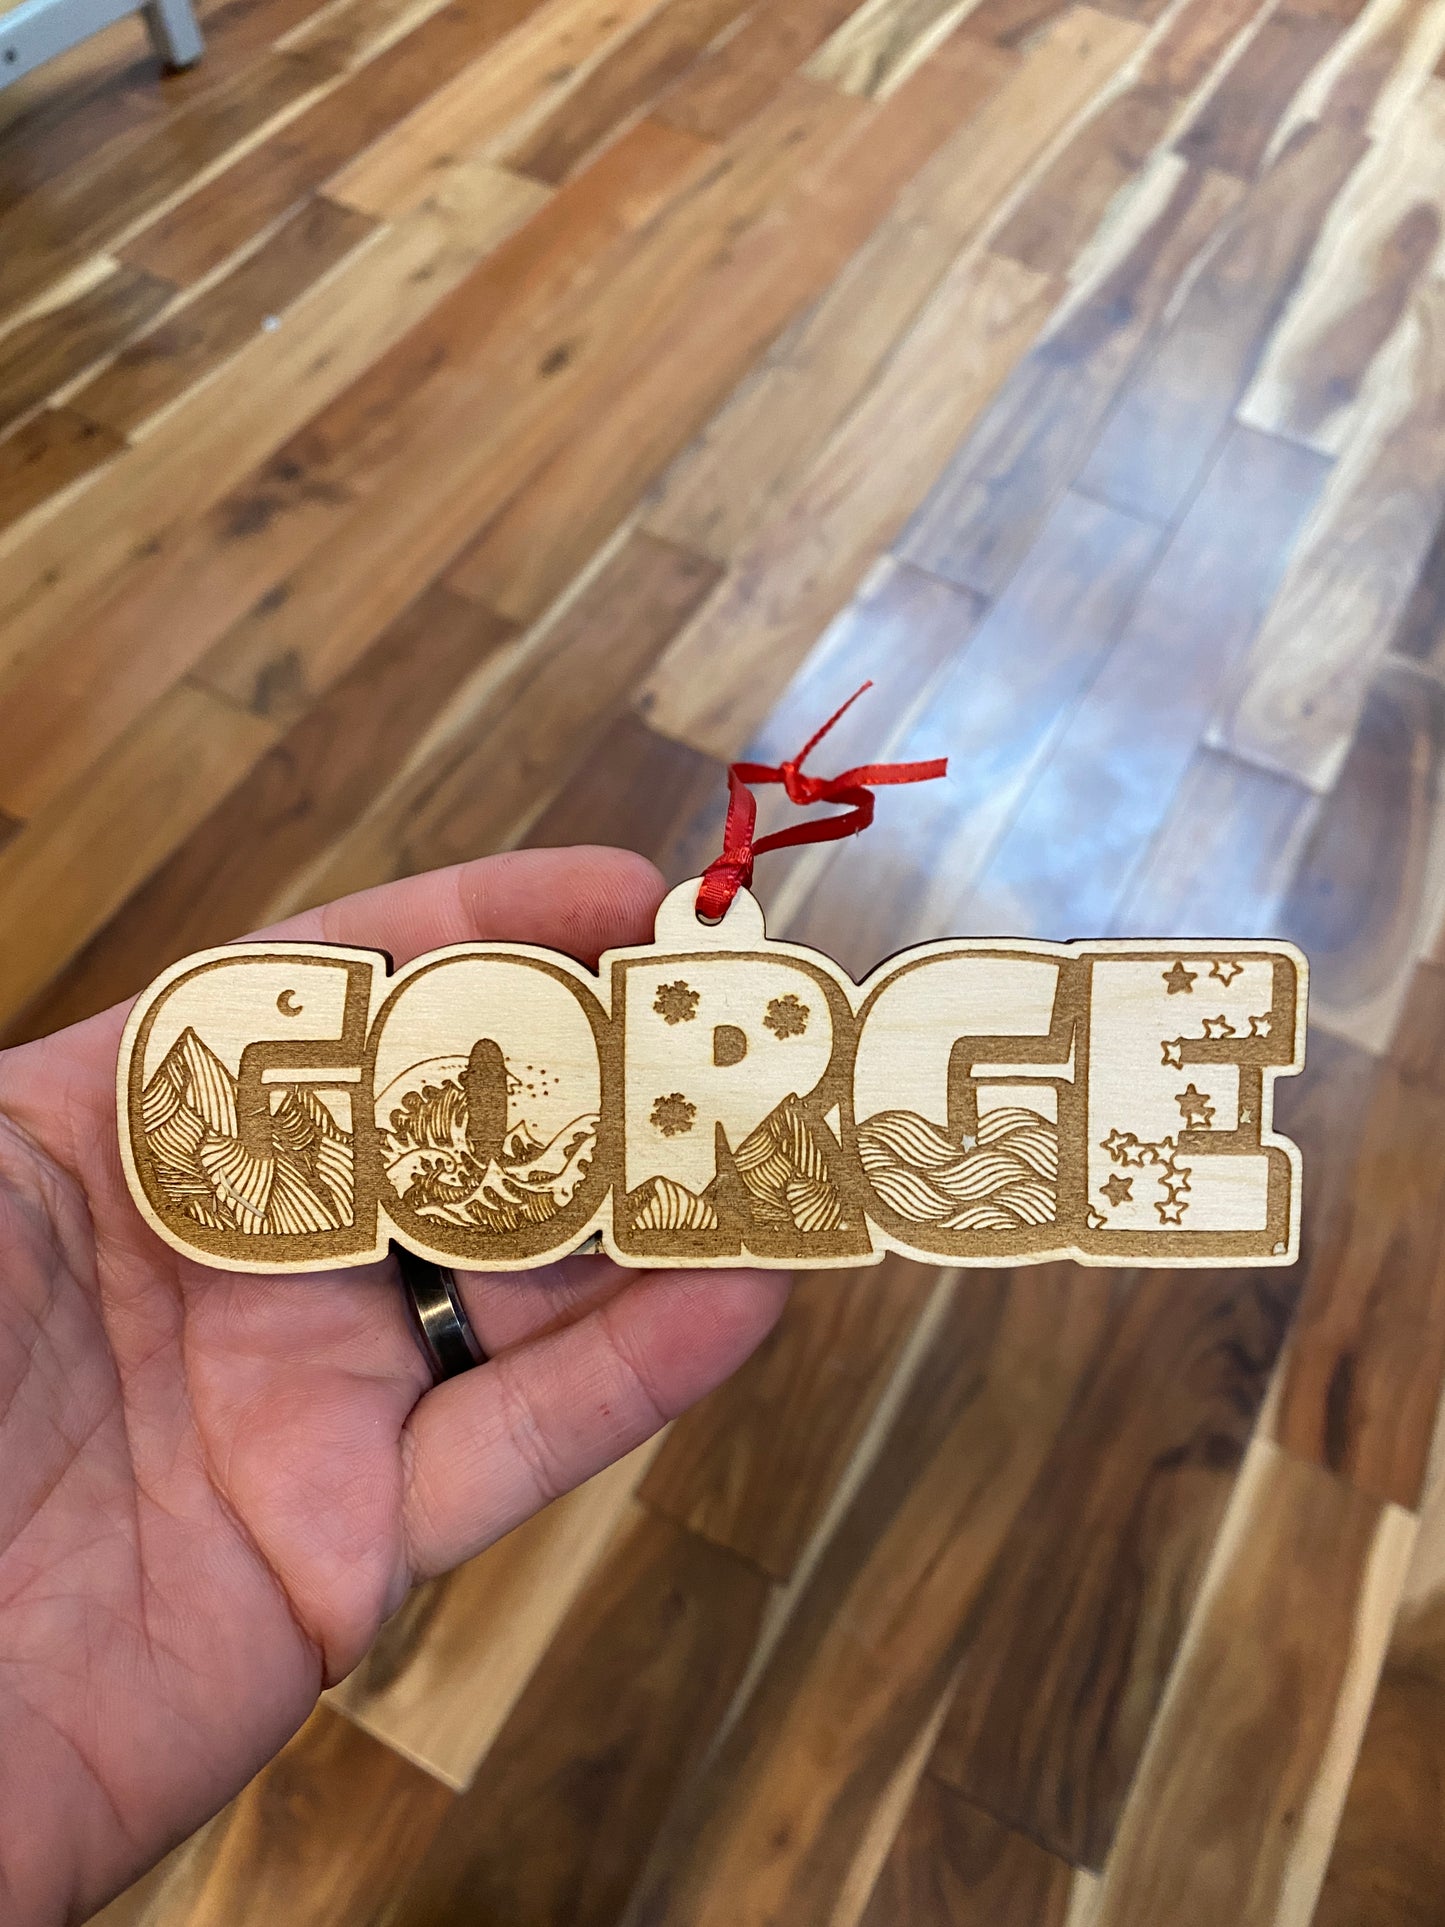 Funny The Way the Gorge is Wood Ornament